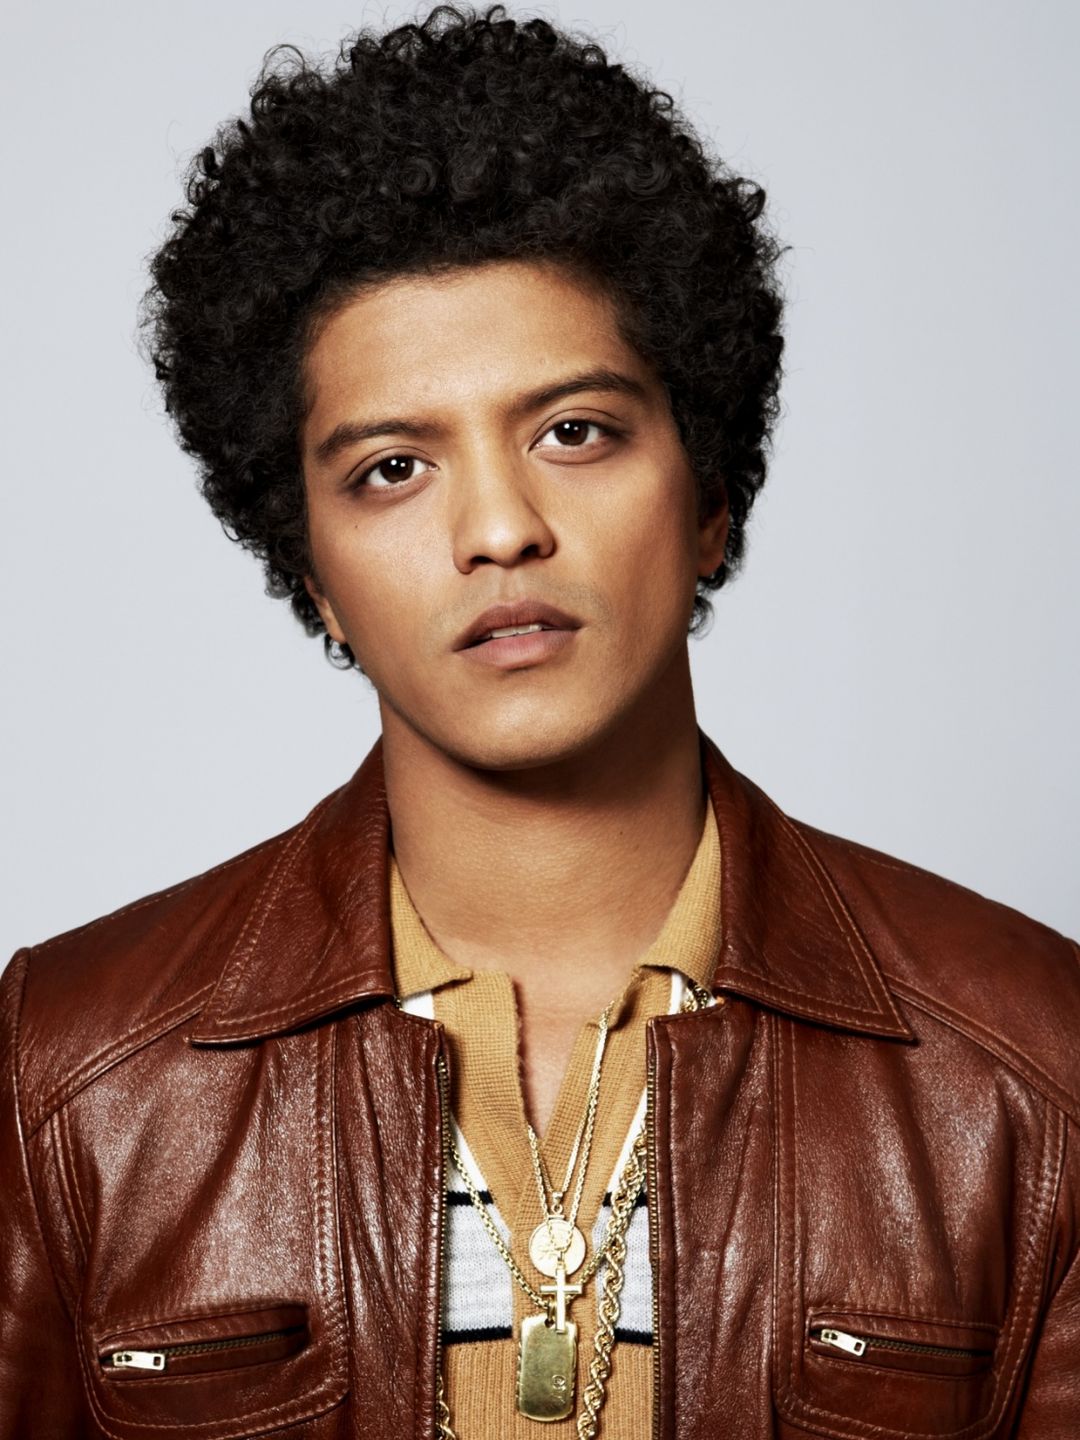 Bruno Mars in his youth